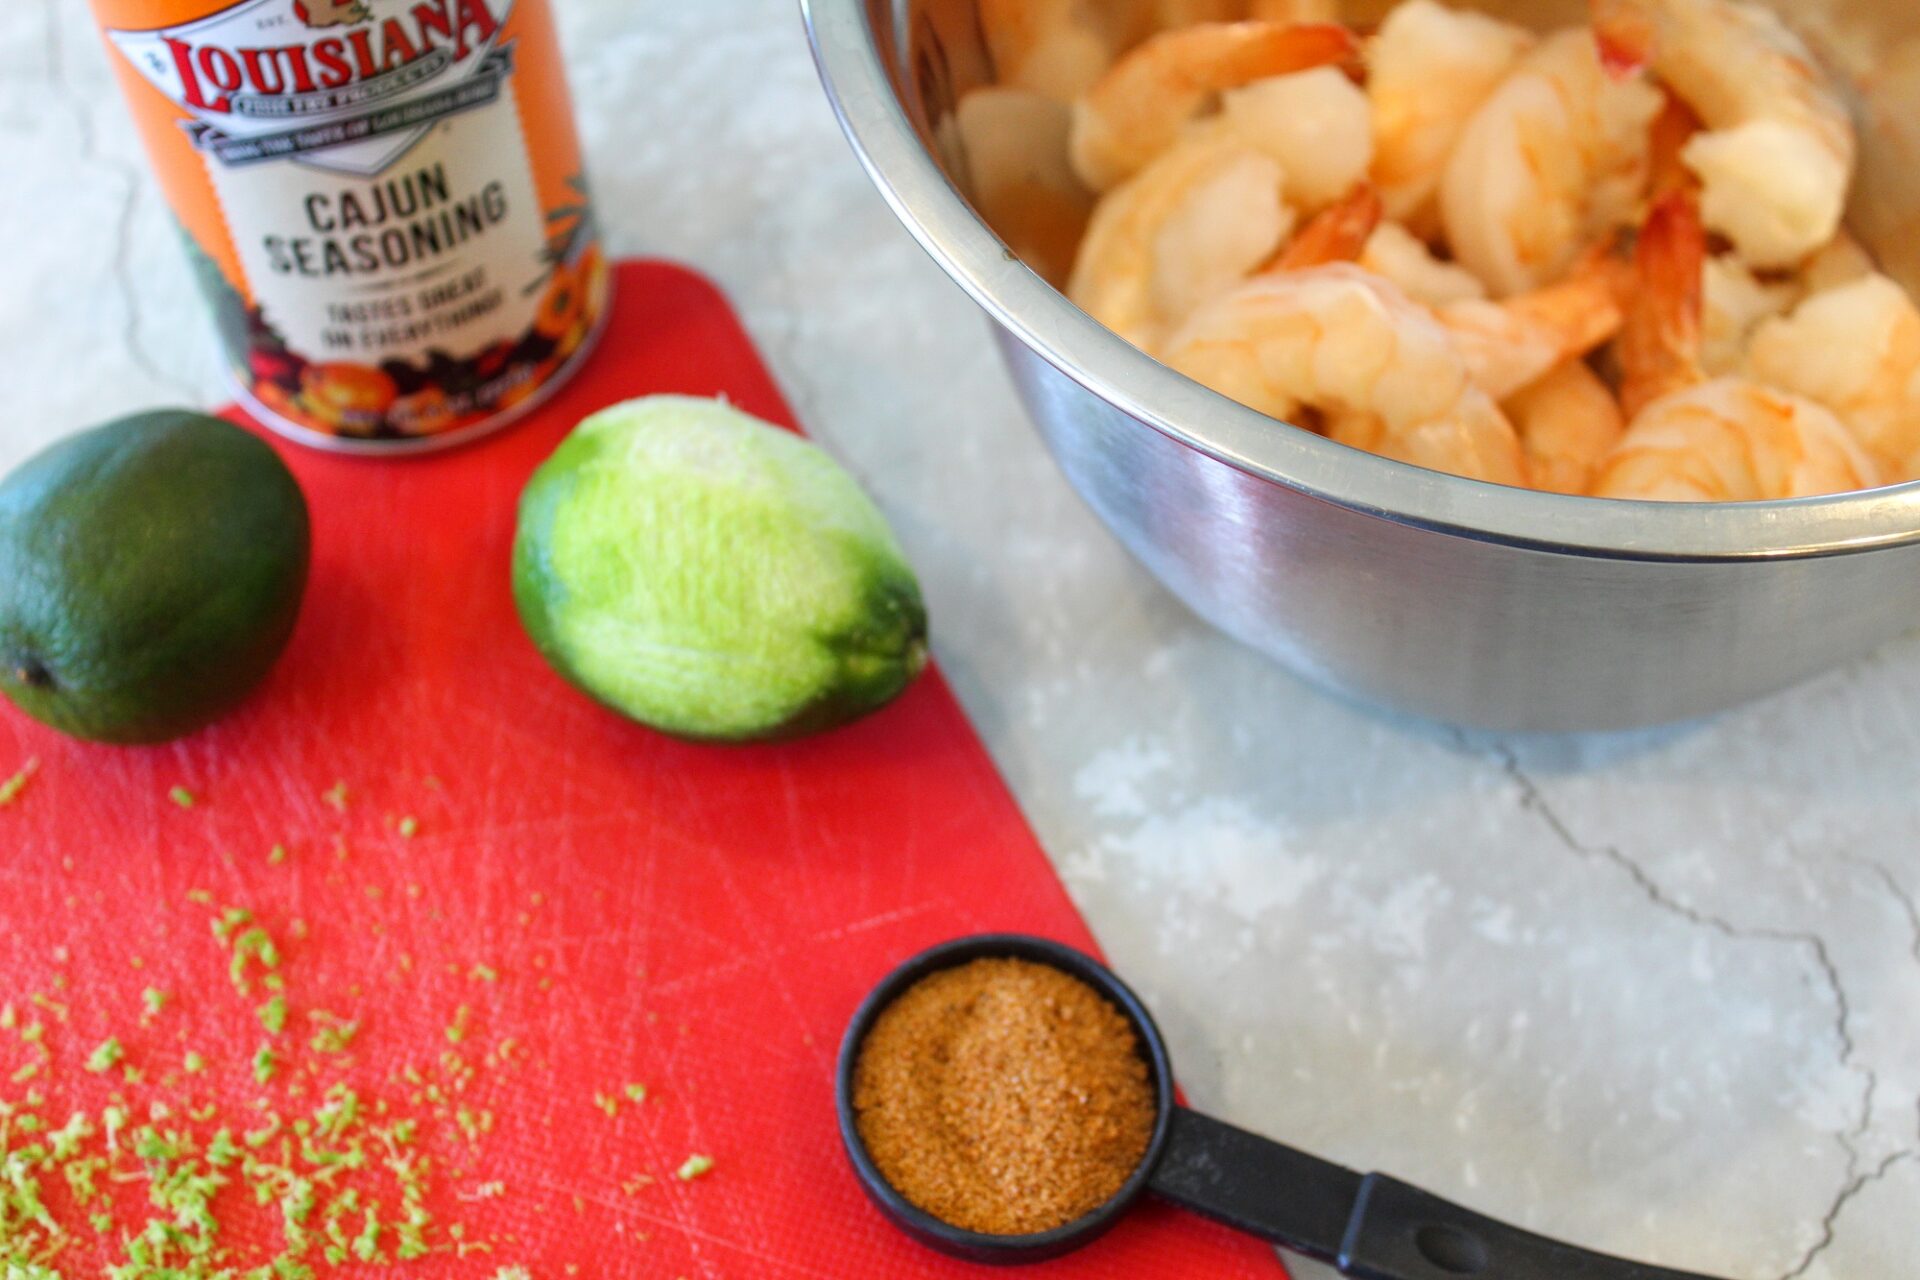 Lime zest and Cajun seasoning on a cutting board next to a bowl of shrimp.